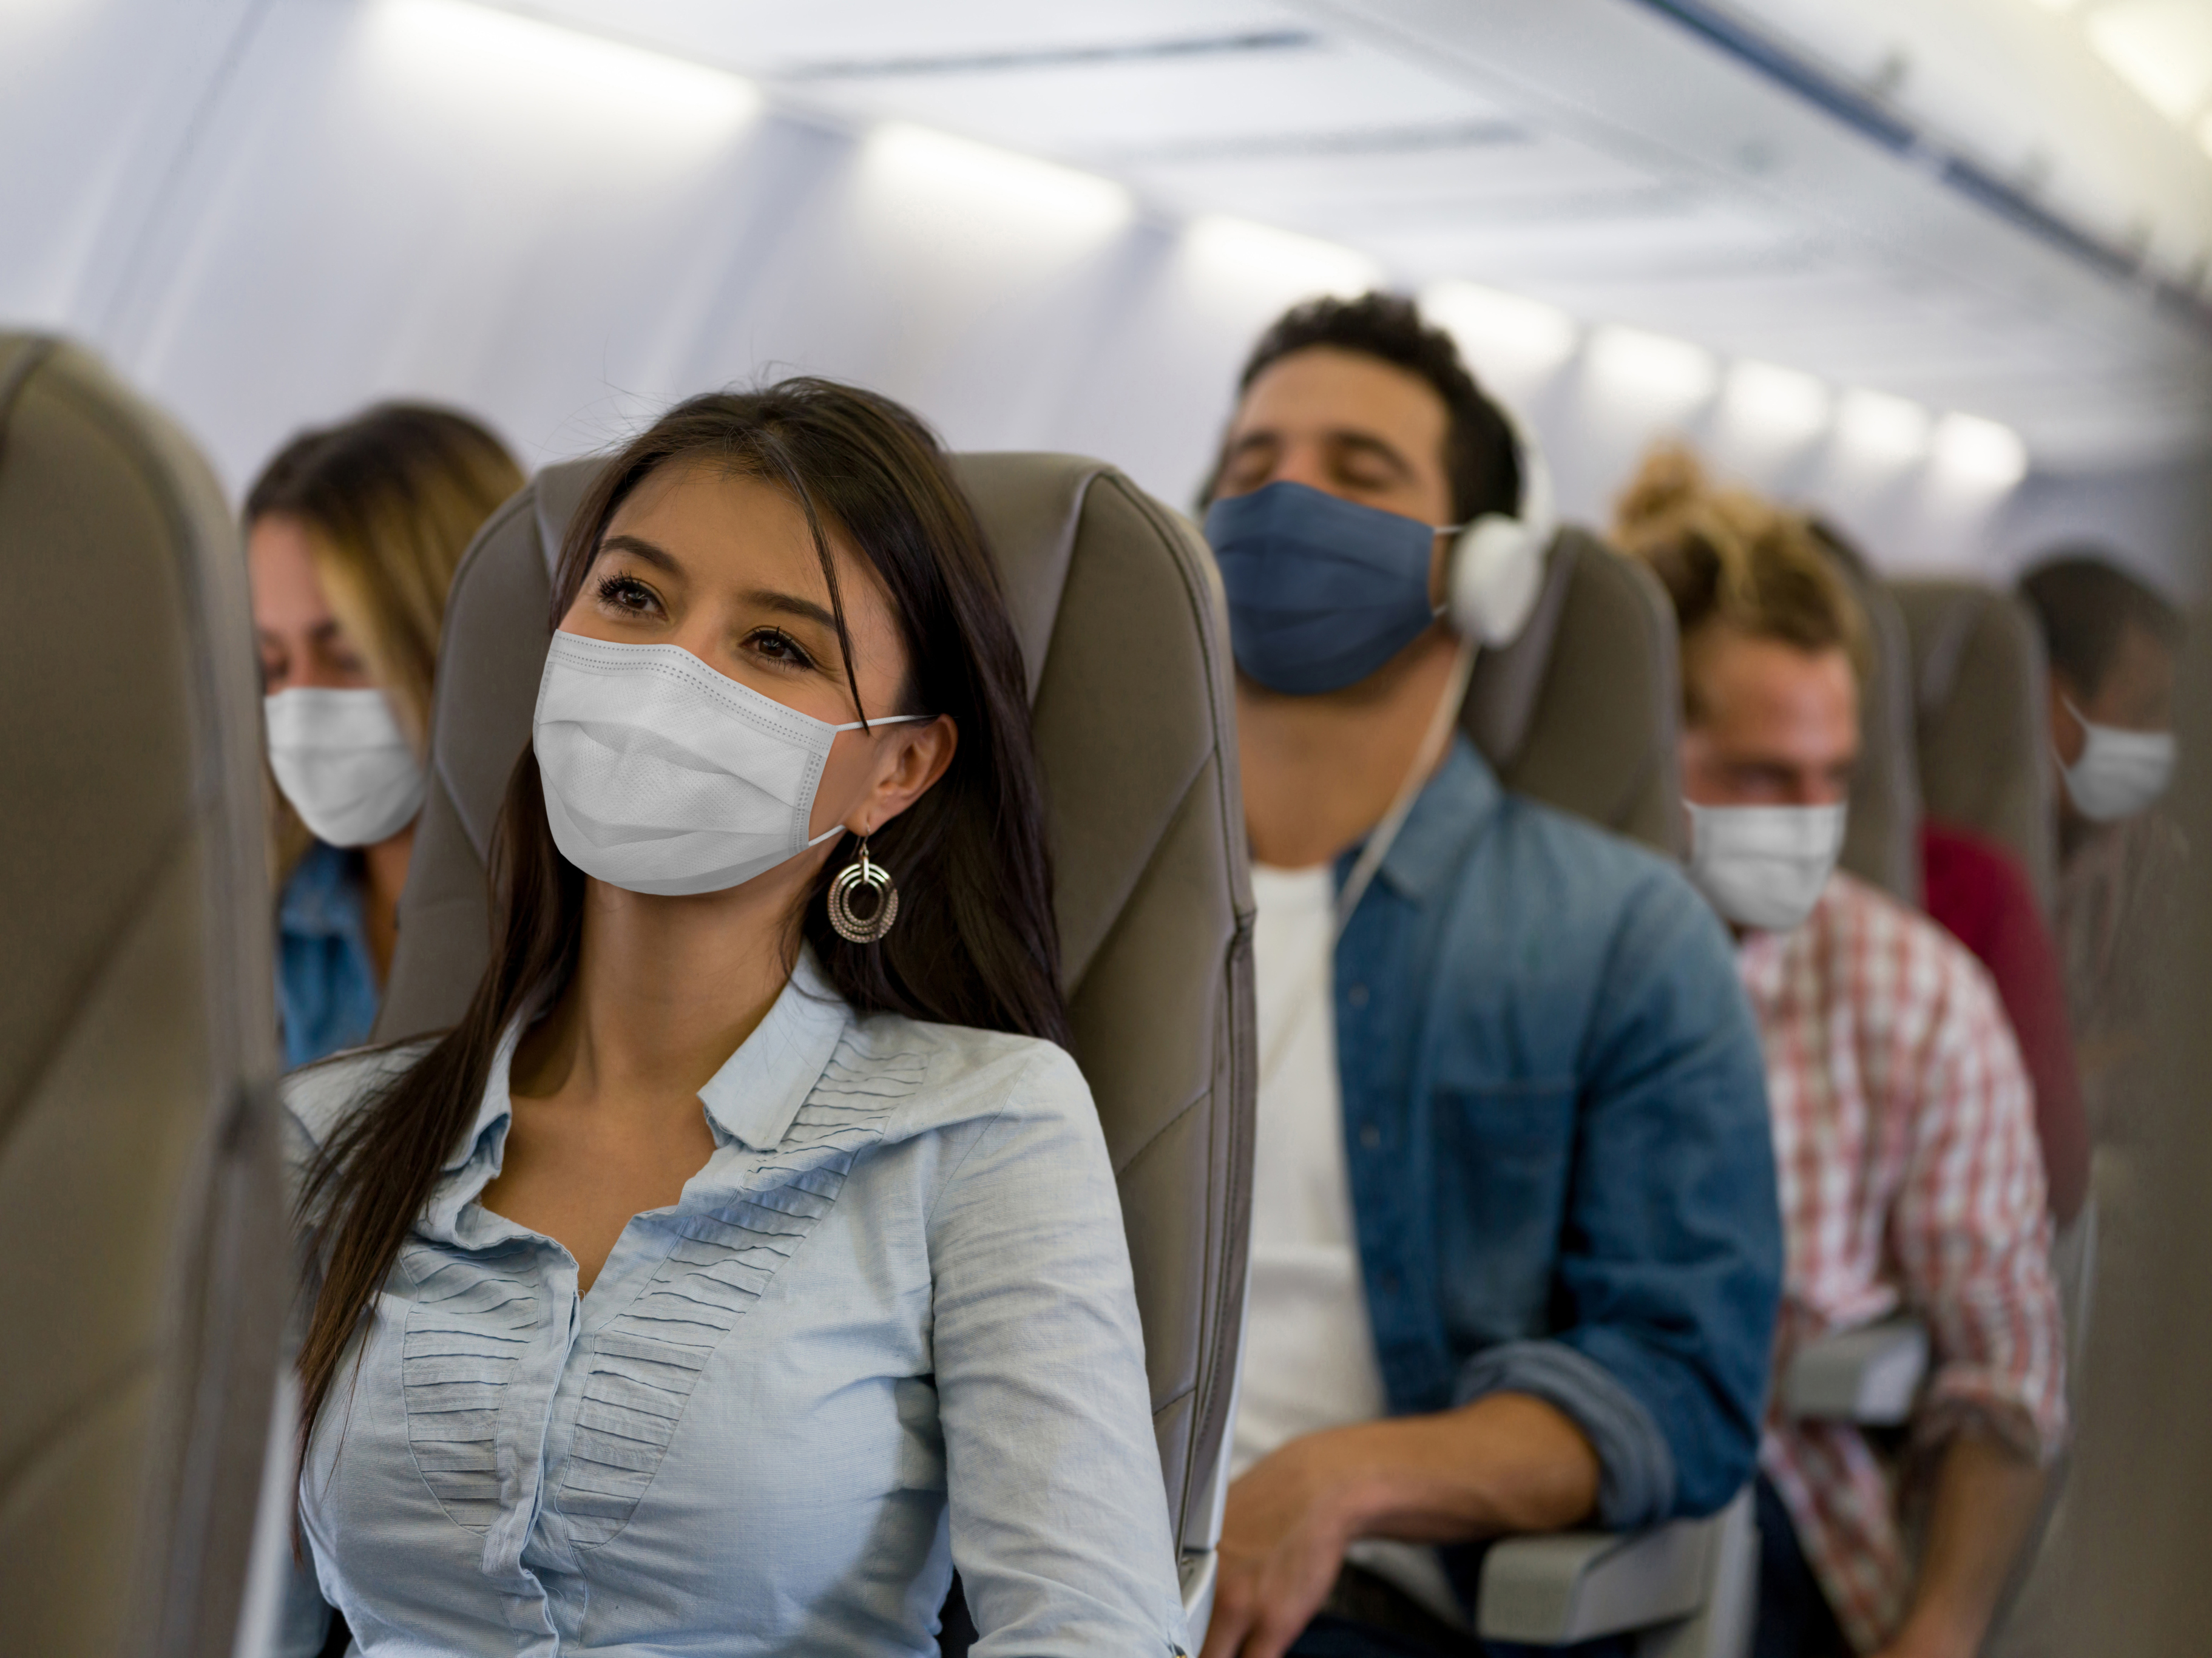 Passagers with mask on the plane